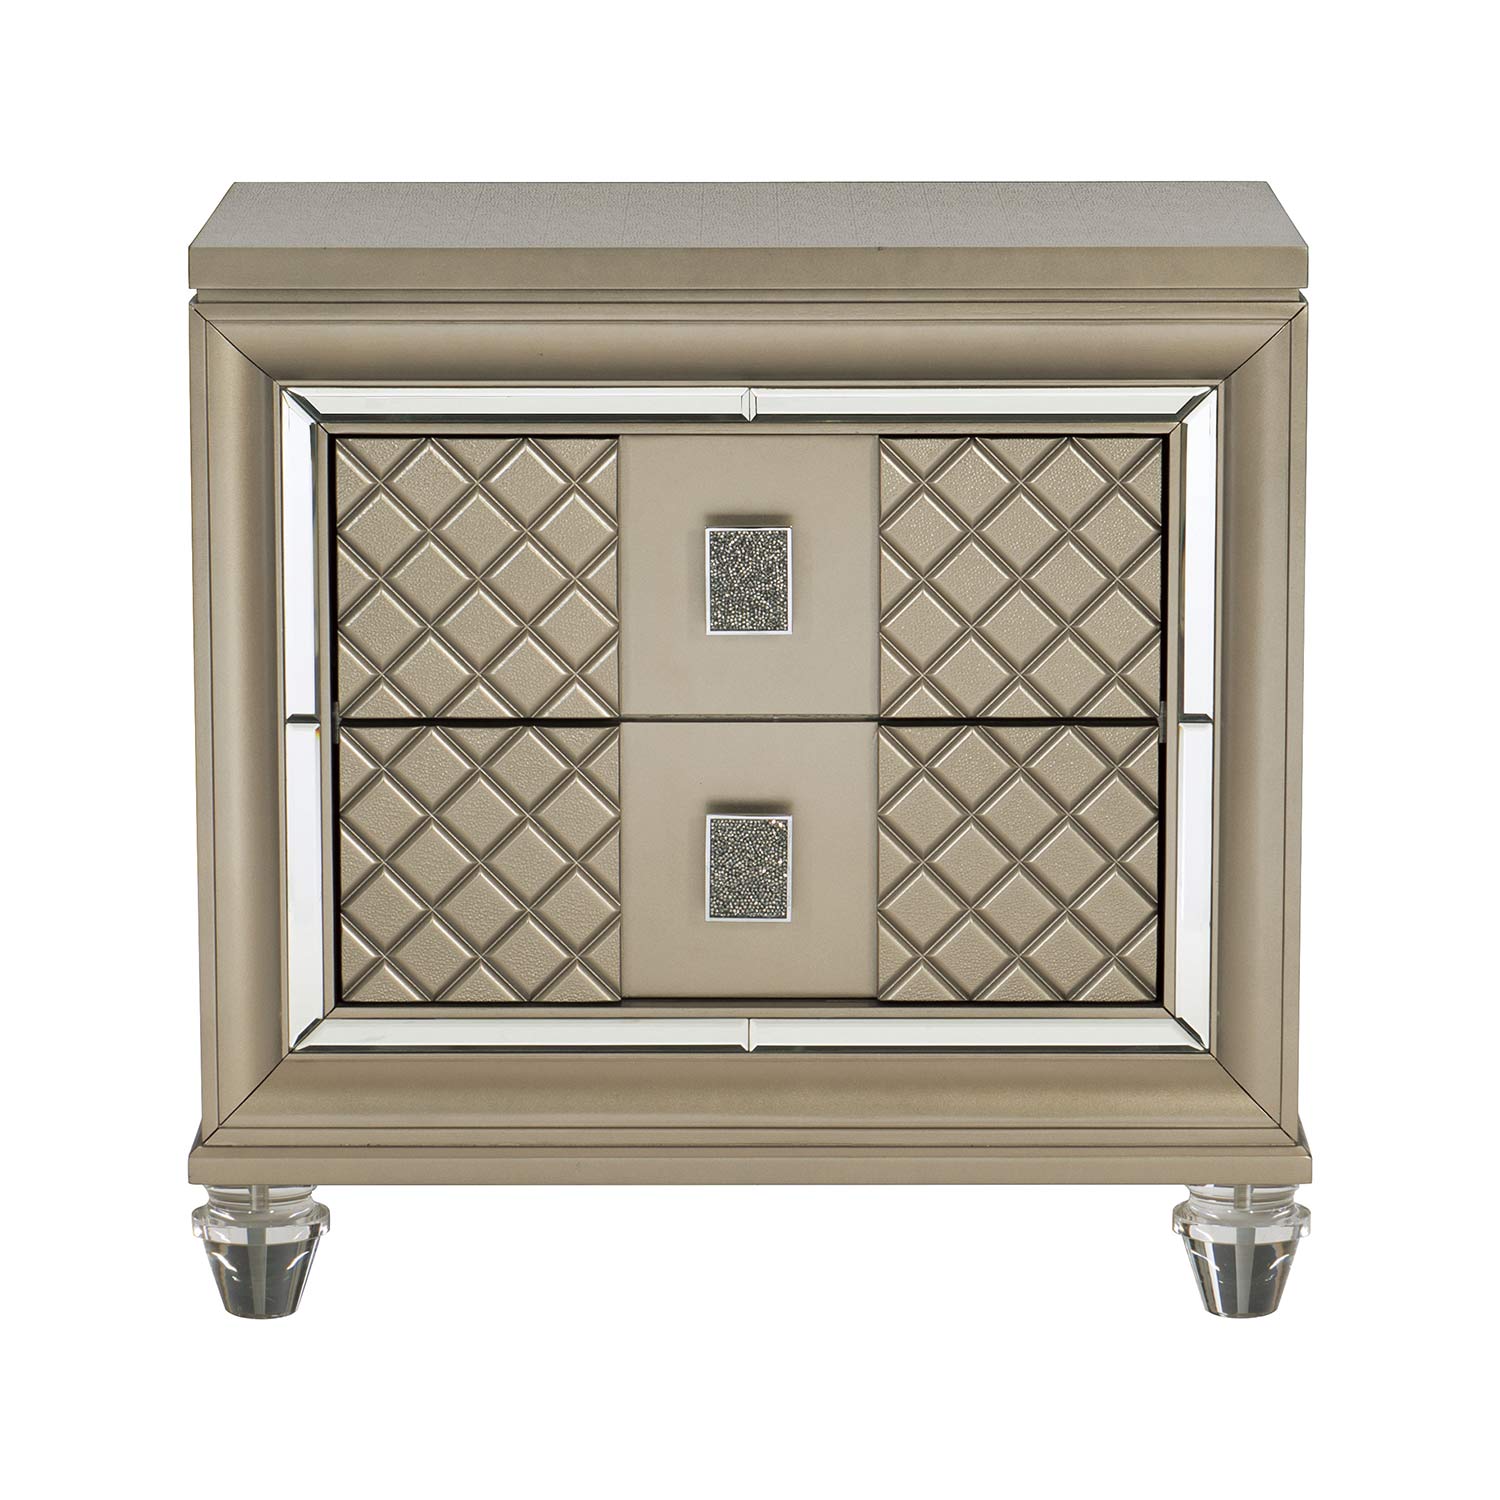 Homelegance Loudon Night Stand - Champagne Mettalic